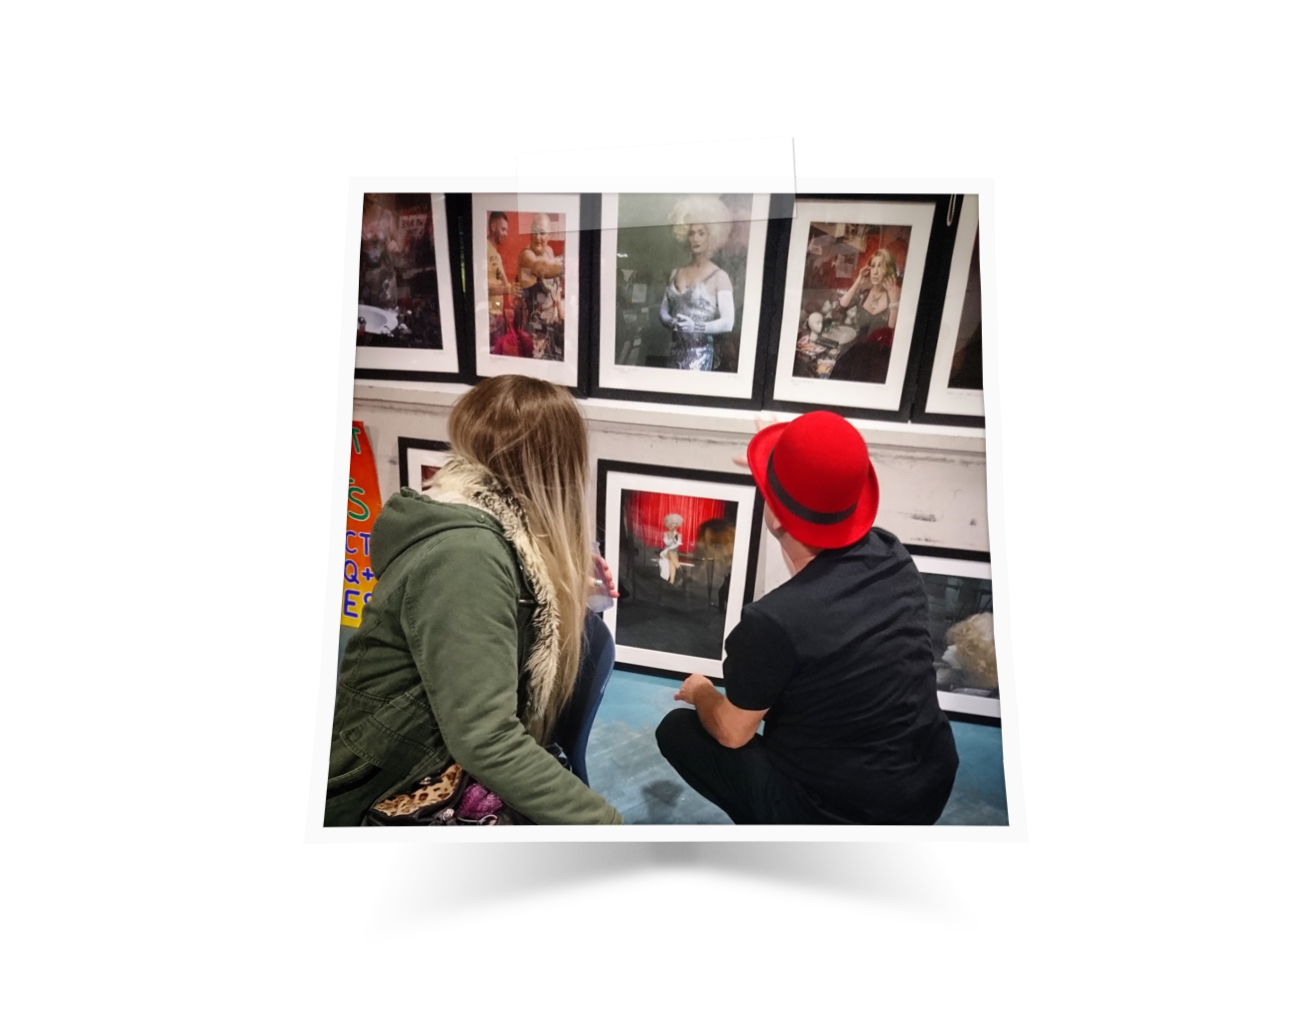 Two people sitting on the floor looking at a gallery of photographs